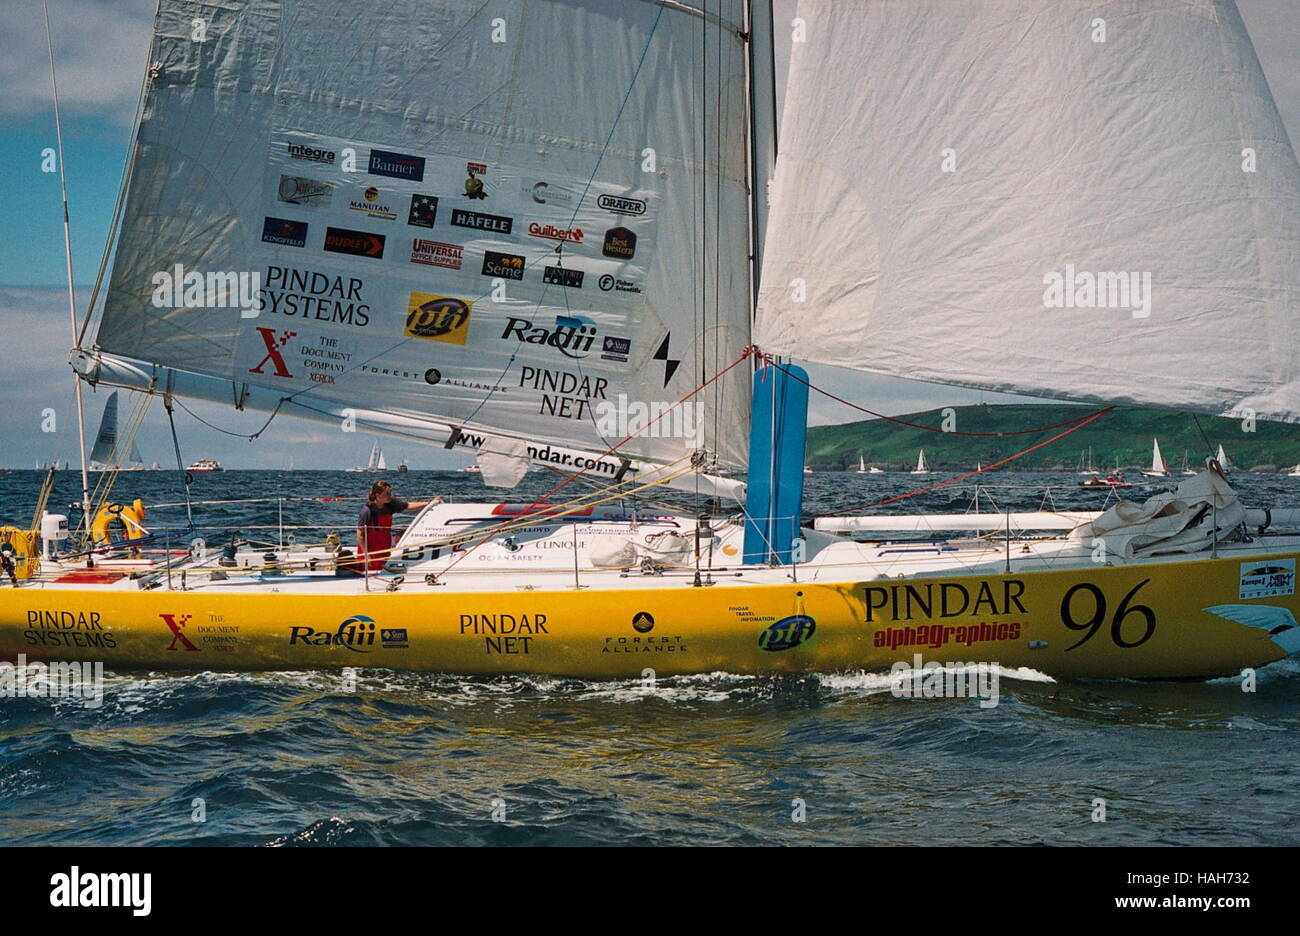 AJAXNETPHOTO. 4TH JUNE, 2000. PLYMOUTH, ENGLAND. - EUROPE 1 NEW MAN STAR TRANSAT YACHT RACE -  YACHT PINDAR SKIPPERED BY EMMA RICHARDS (GBR) AT THE START OF THE EUROPE 1 NEW MAN STAR SINGLE HANDED TRANSATLANTIC RACE.  PHOTO:TONY CARNEY/ACME/AJAX  REF:TC4924 2 2A Stock Photo